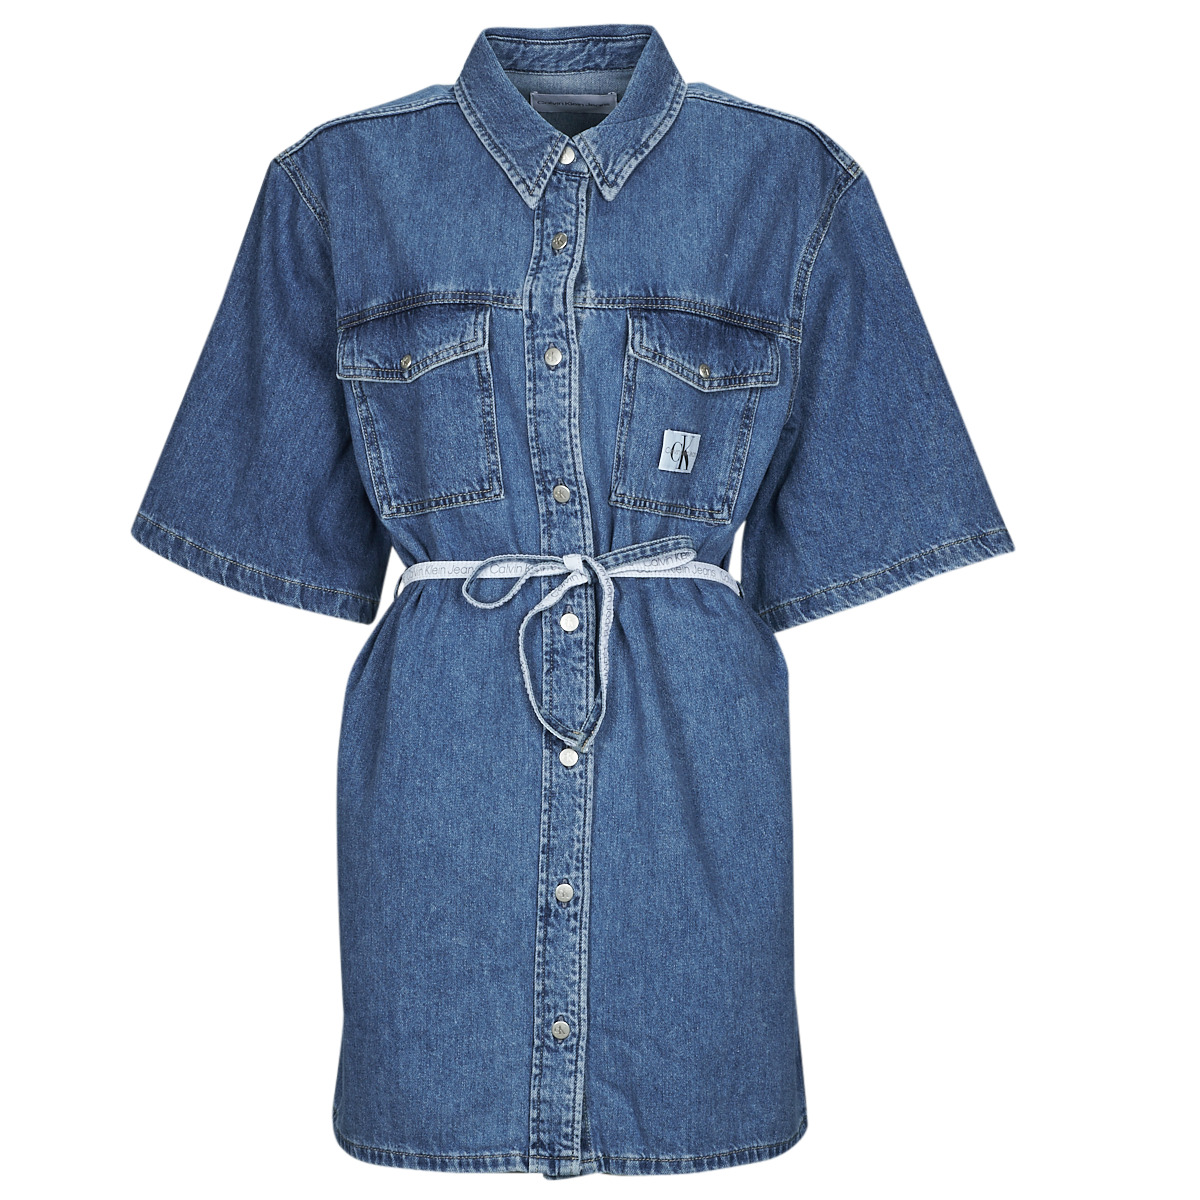 Calvin Klein Jeans UTILITY BELTED NET - ! Women SHIRT Clothing DRESS Dresses - delivery | Short Jean Spartoo Free